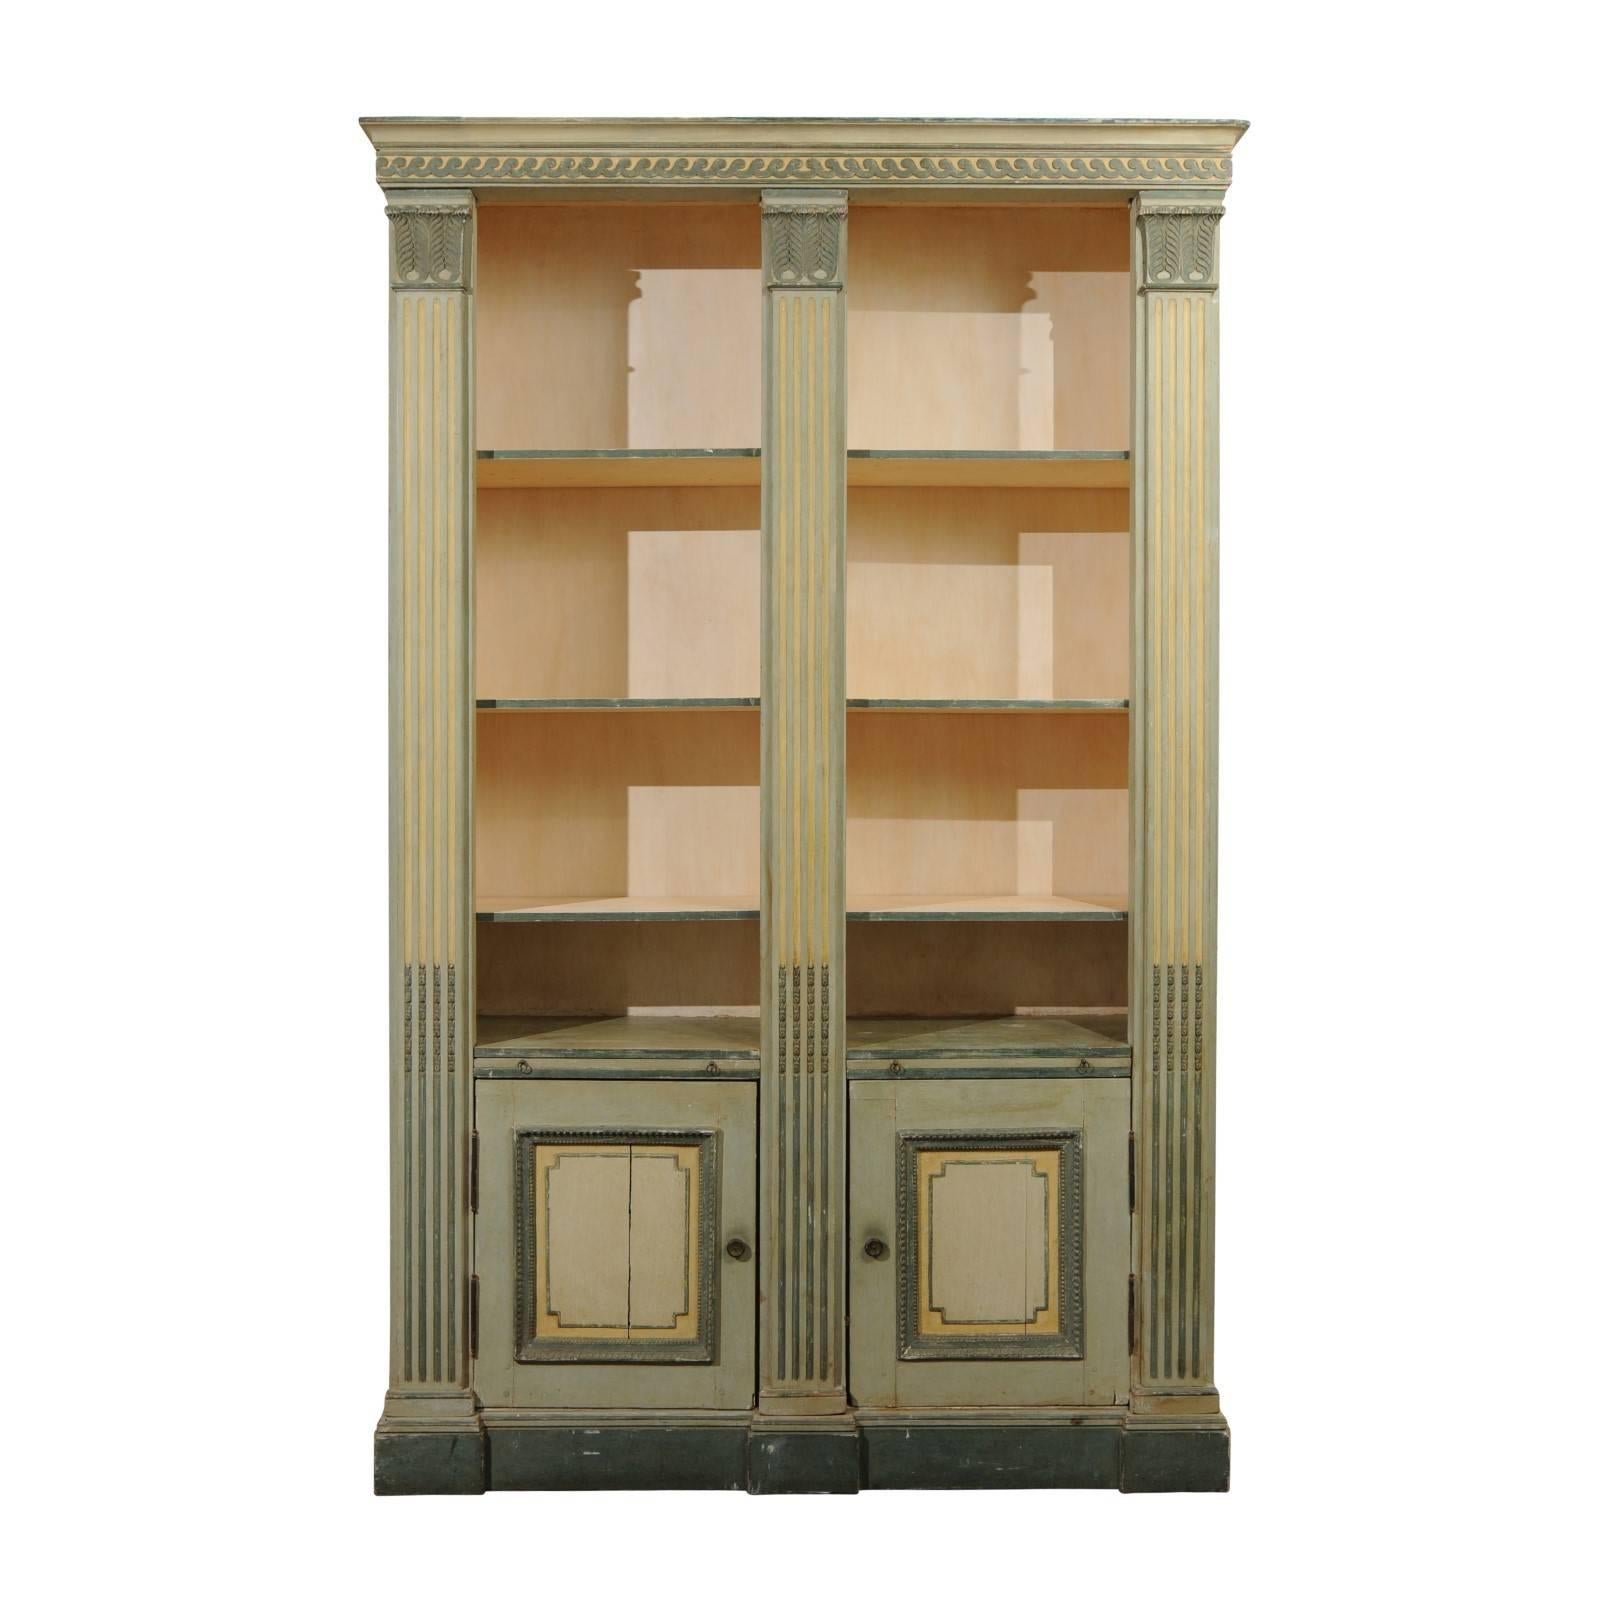 French Maison Jansen Louis XVI Style Painted Bookcase with Lotiform Pilasters